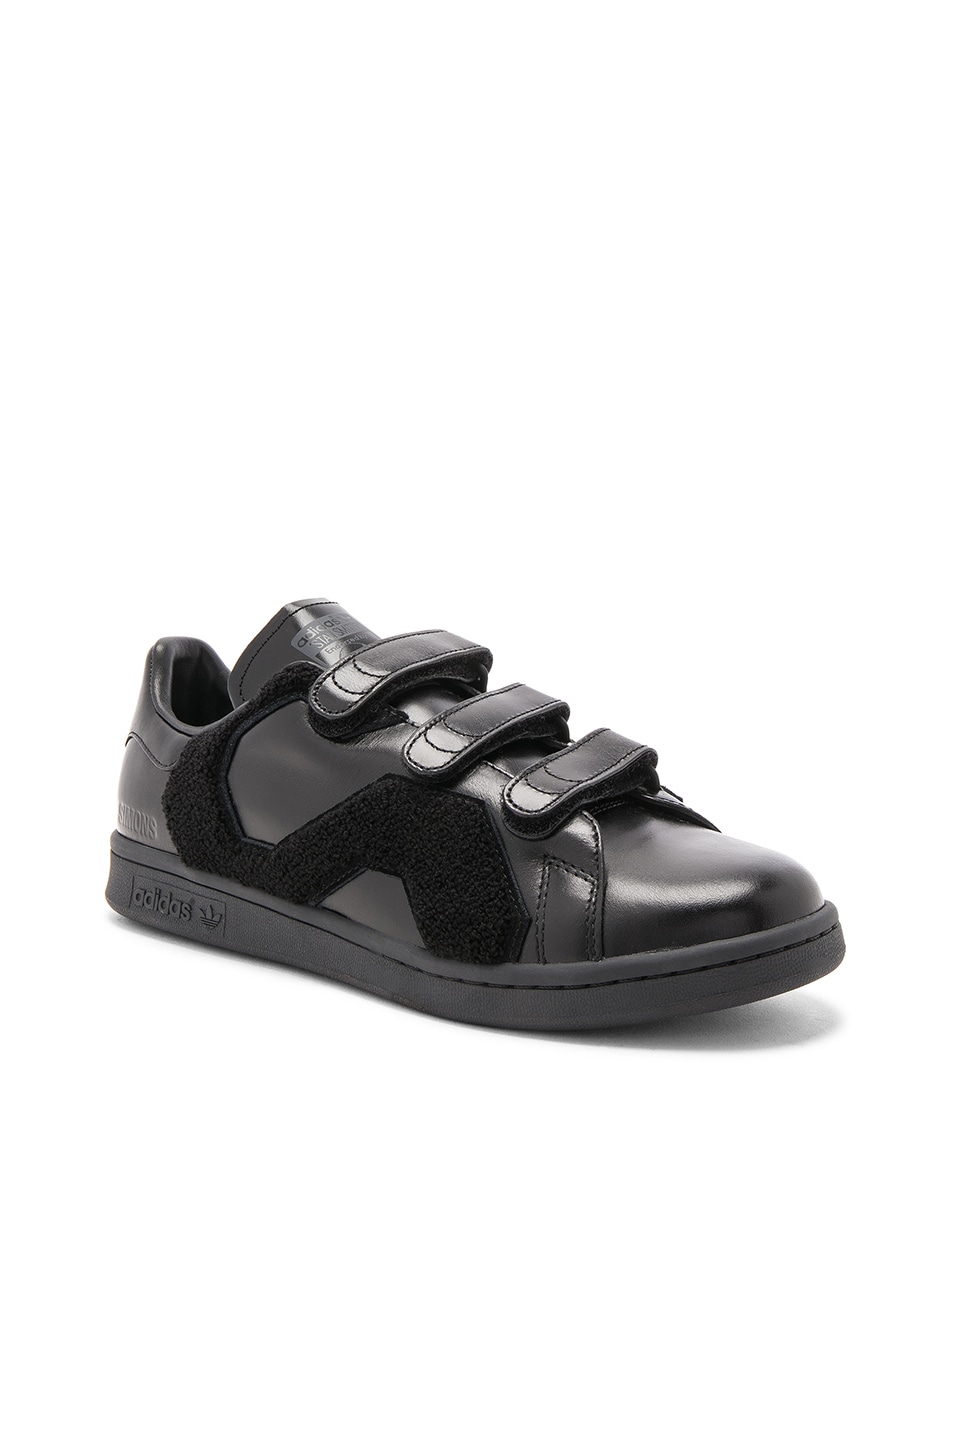 Image 1 of Raf Simons x Adidas RS Stan Smith Comfort Badge in Core Black